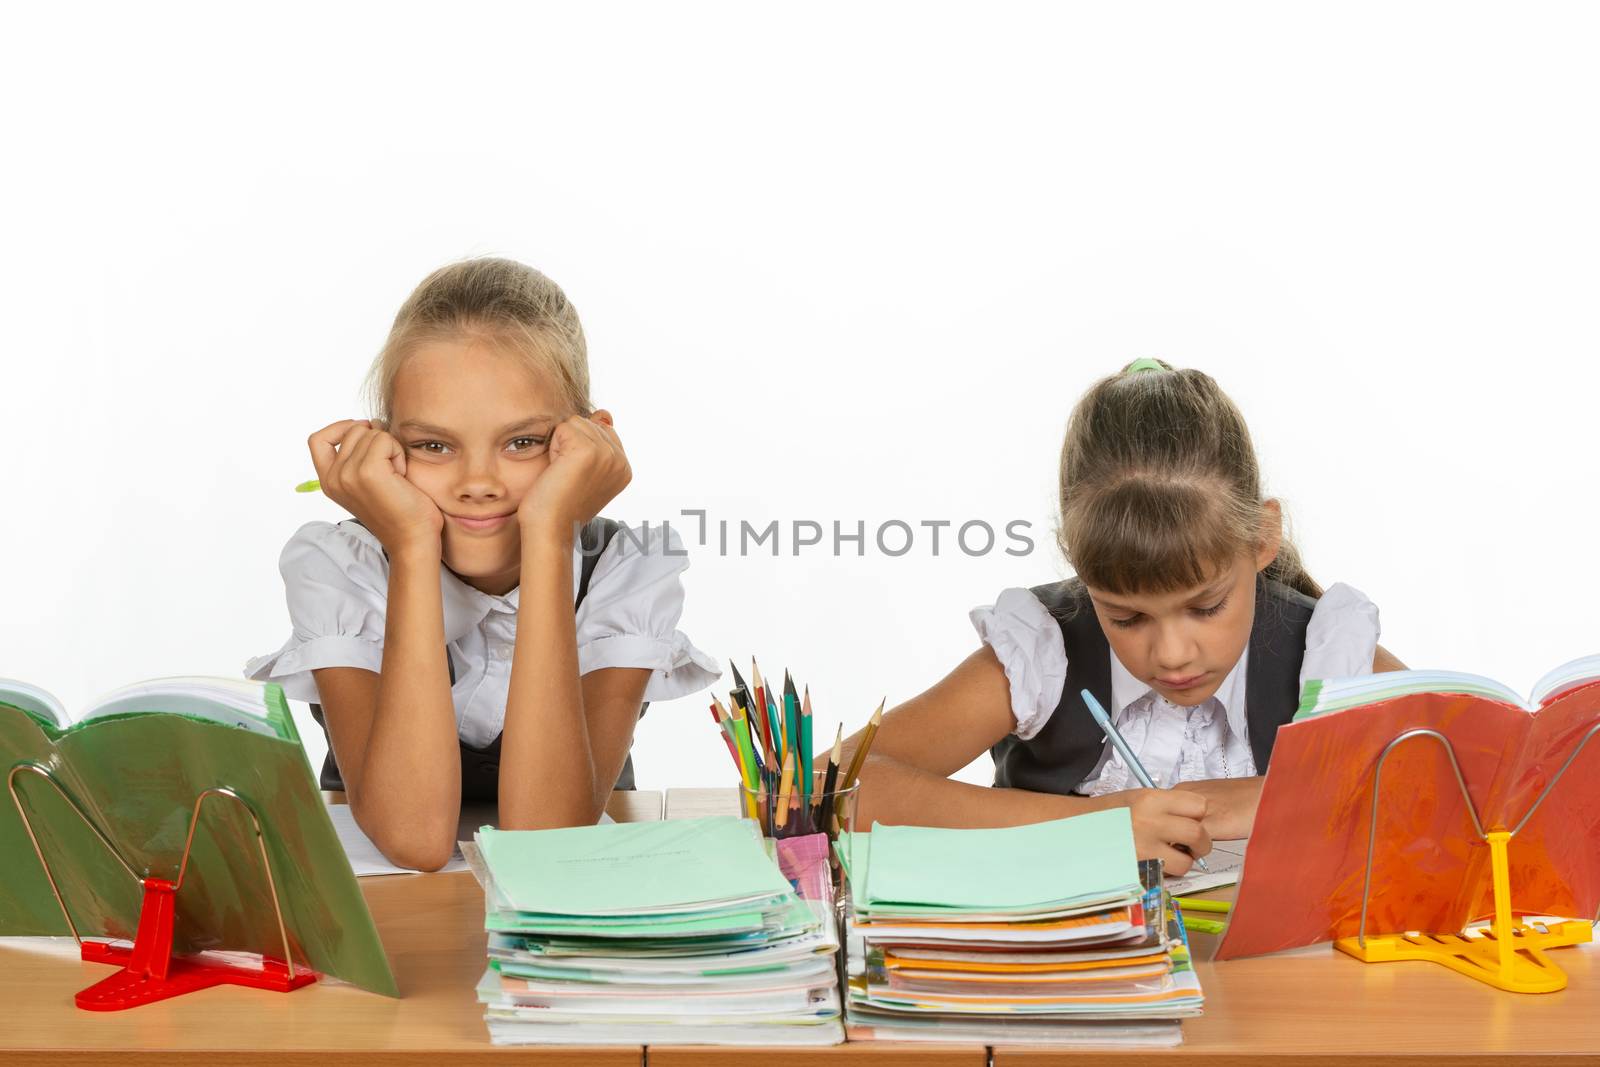 Two schoolgirls at a desk, one leaning on her hands and looking into the frame, the other writes